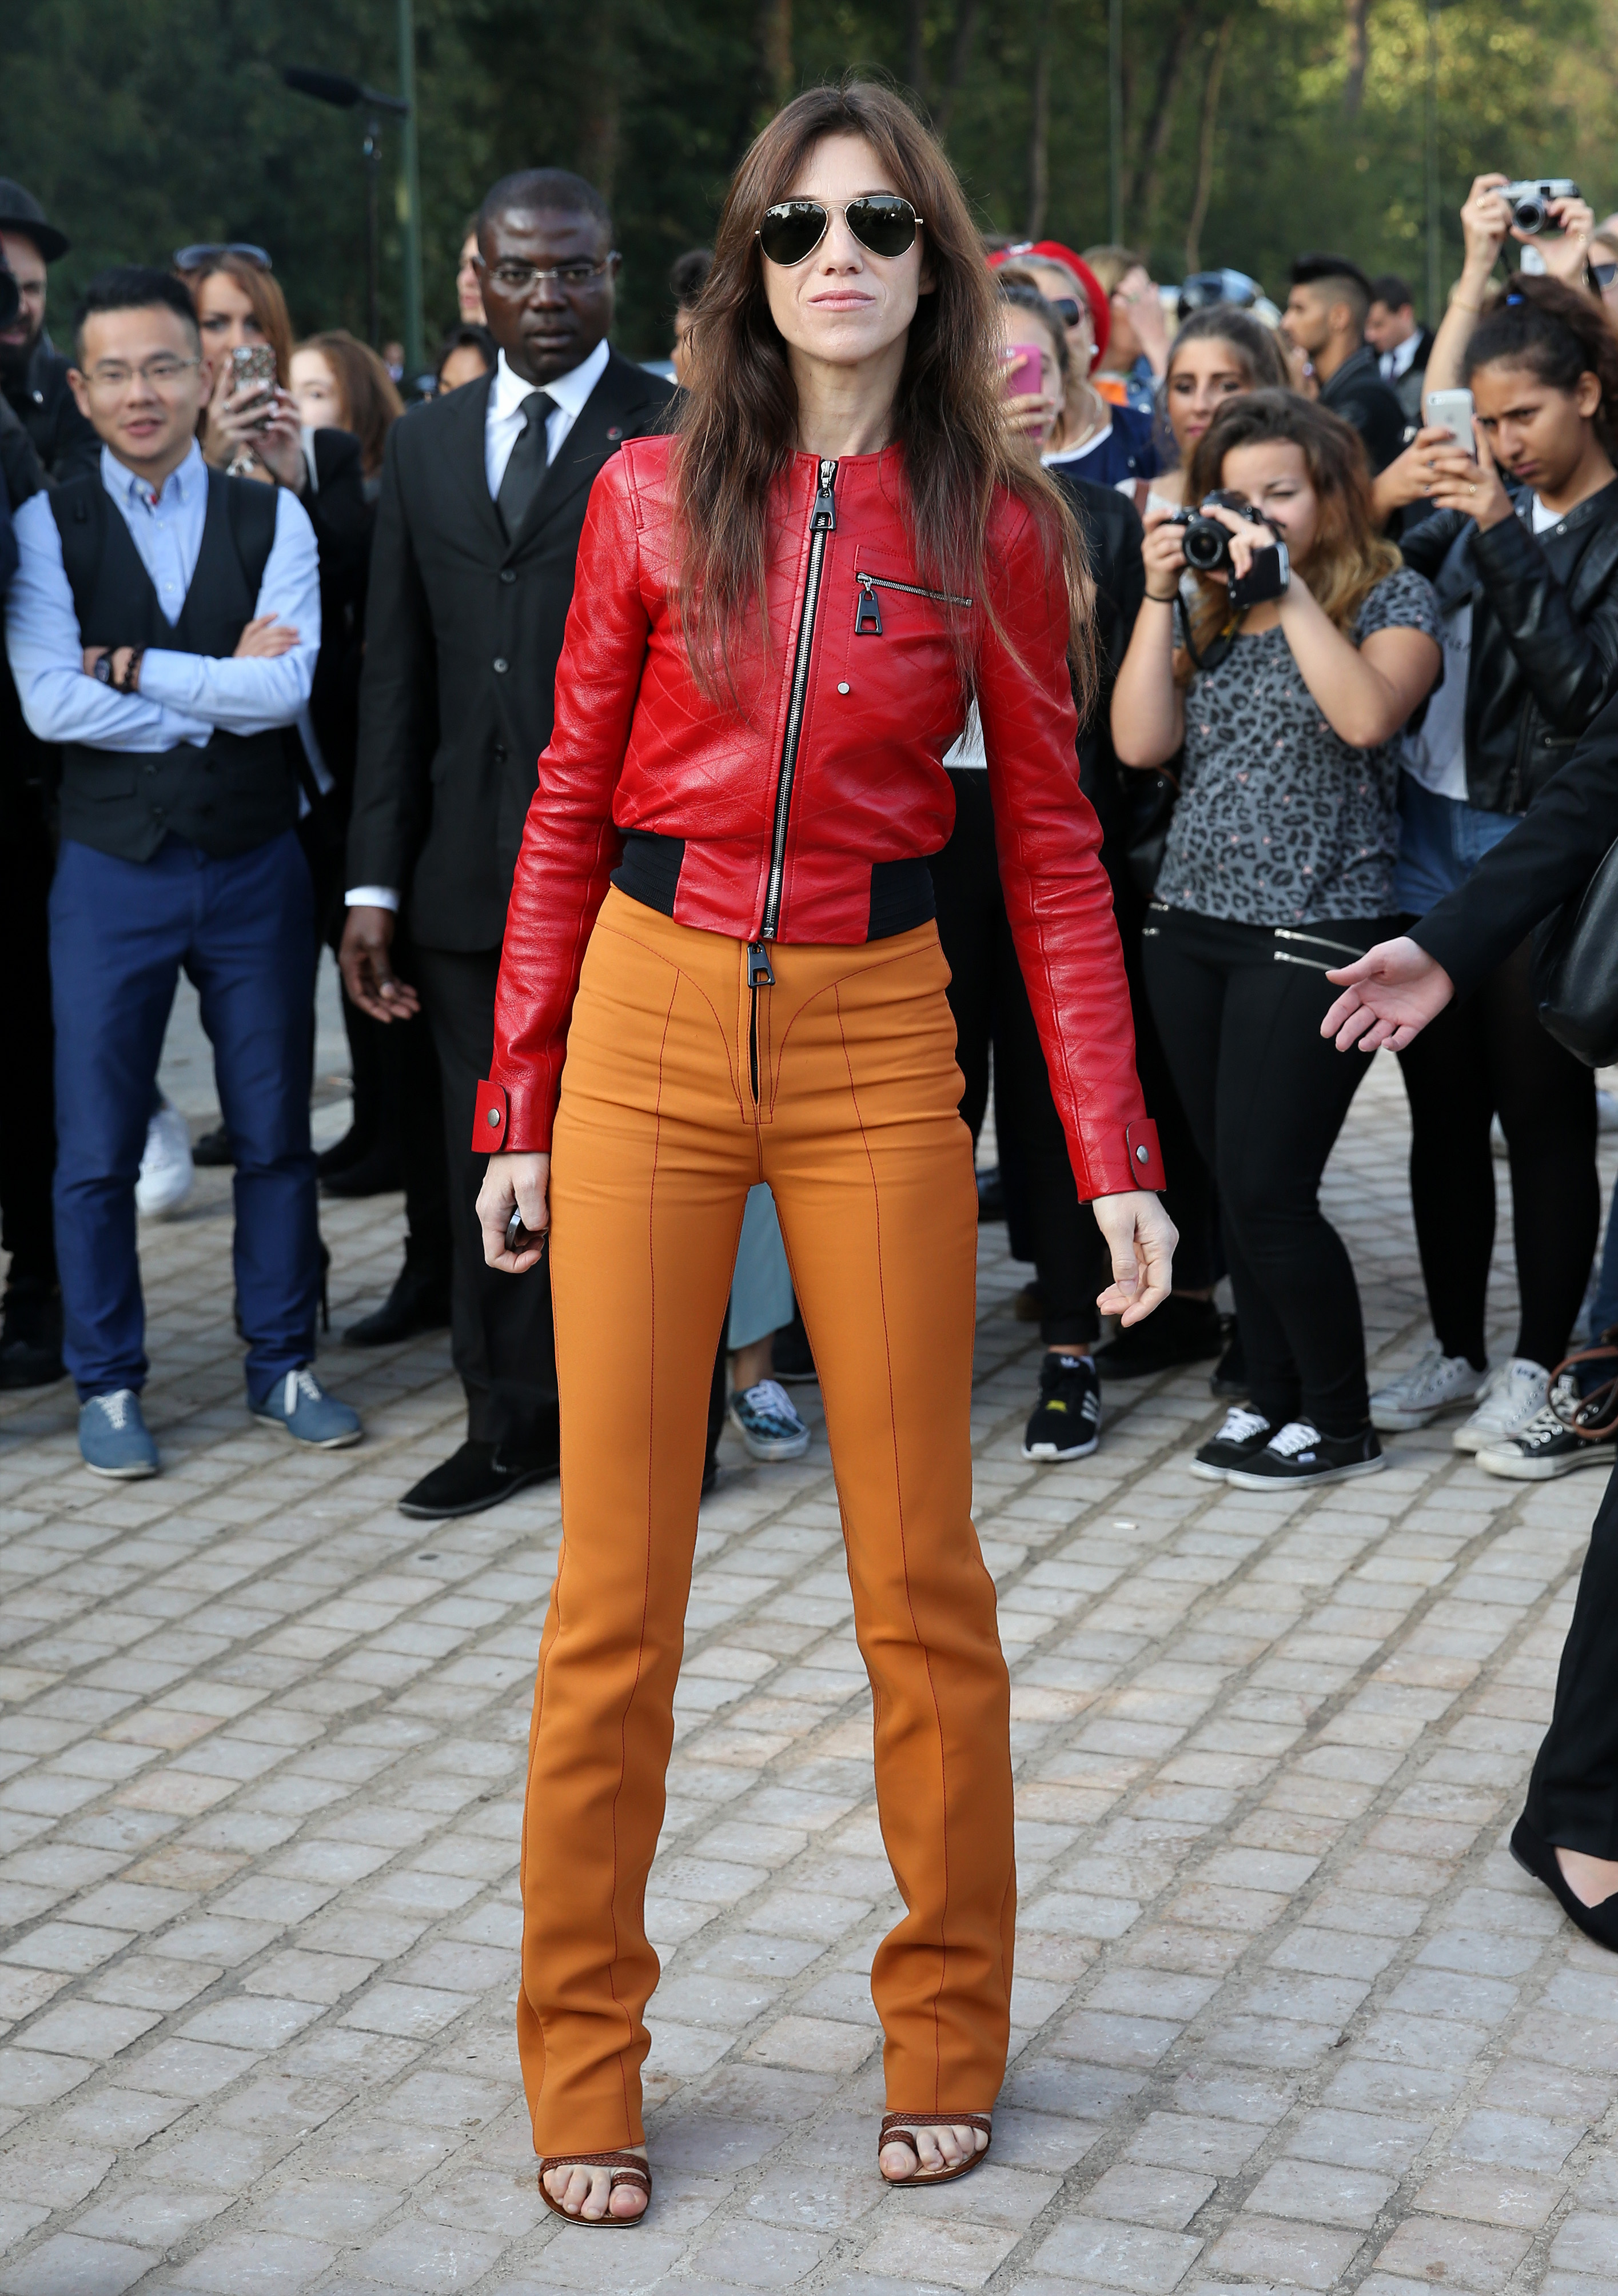 Louis Vuitton on X: Charlotte Gainsbourg wearing a custom made # LouisVuitton look at the Venice Film Festival in Italy   / X